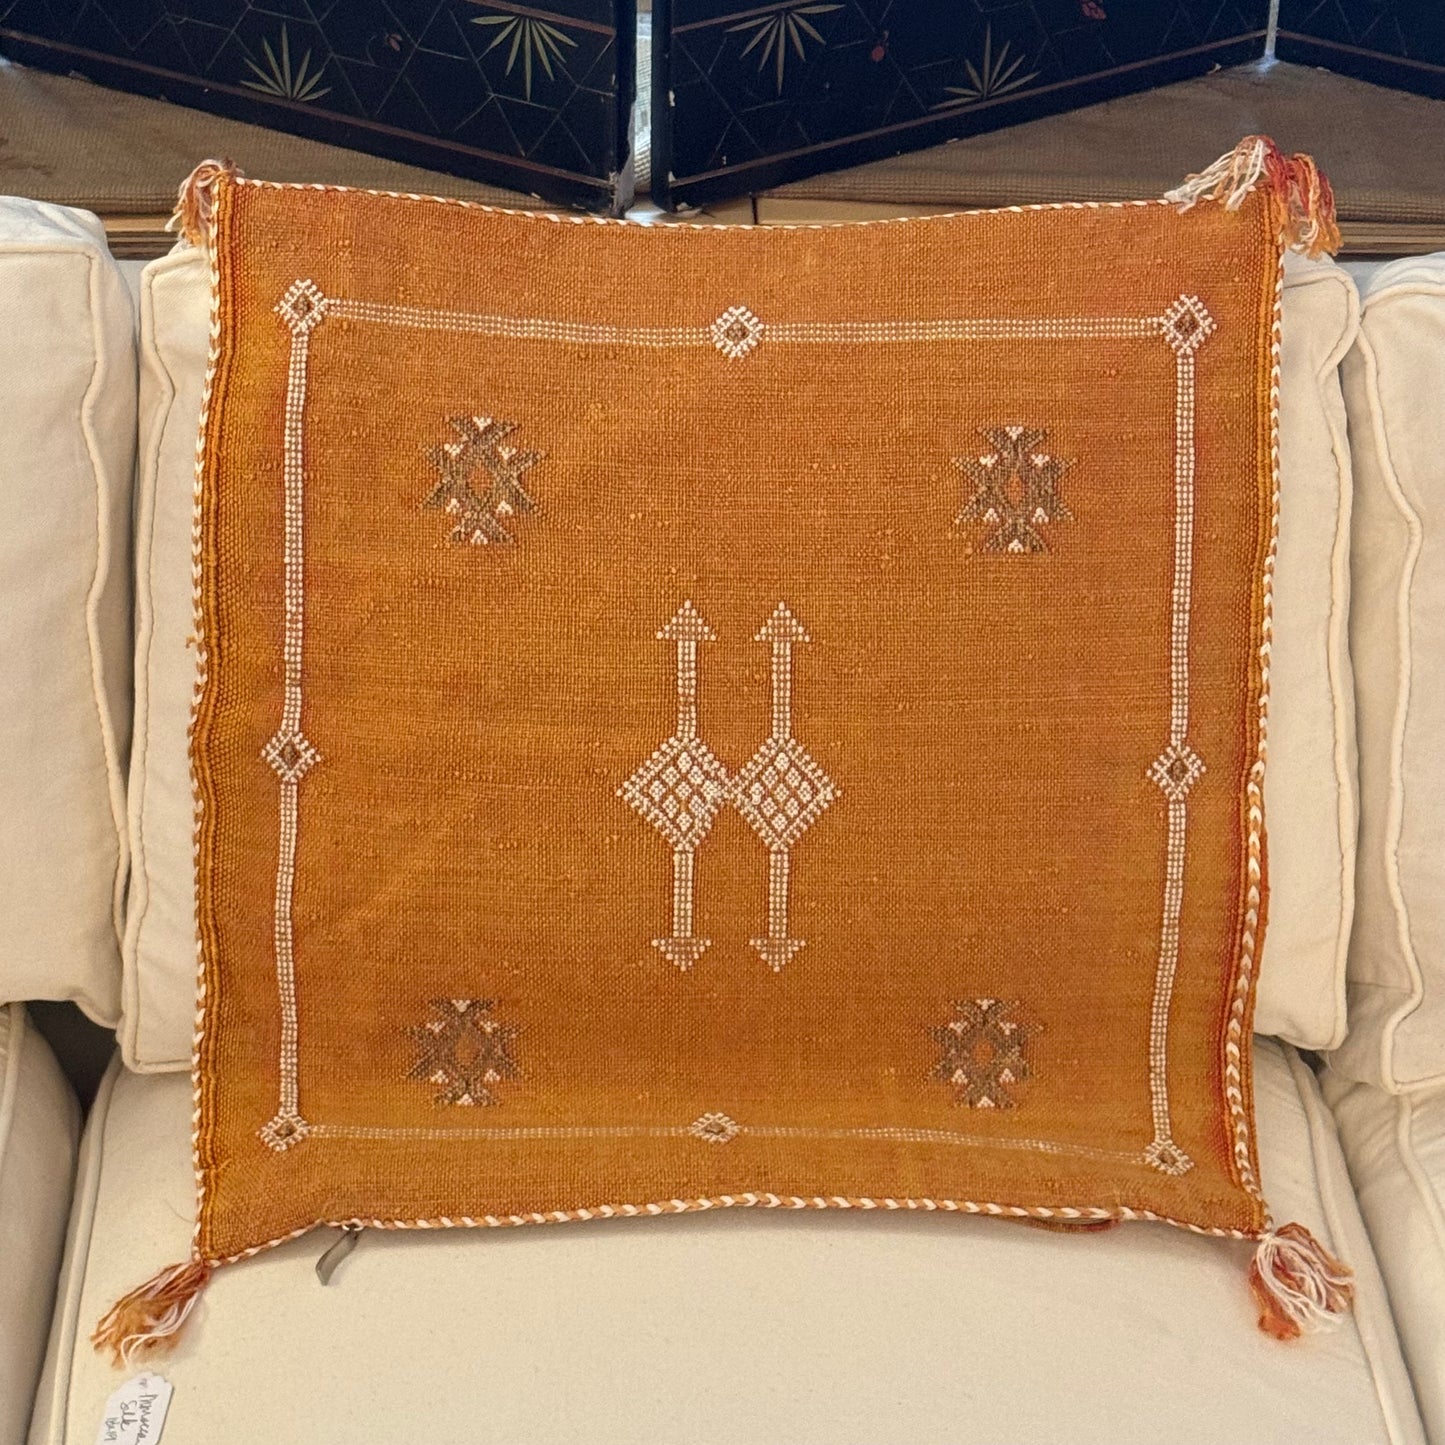 Moroccan Silk Pillows: The Mayta Collection